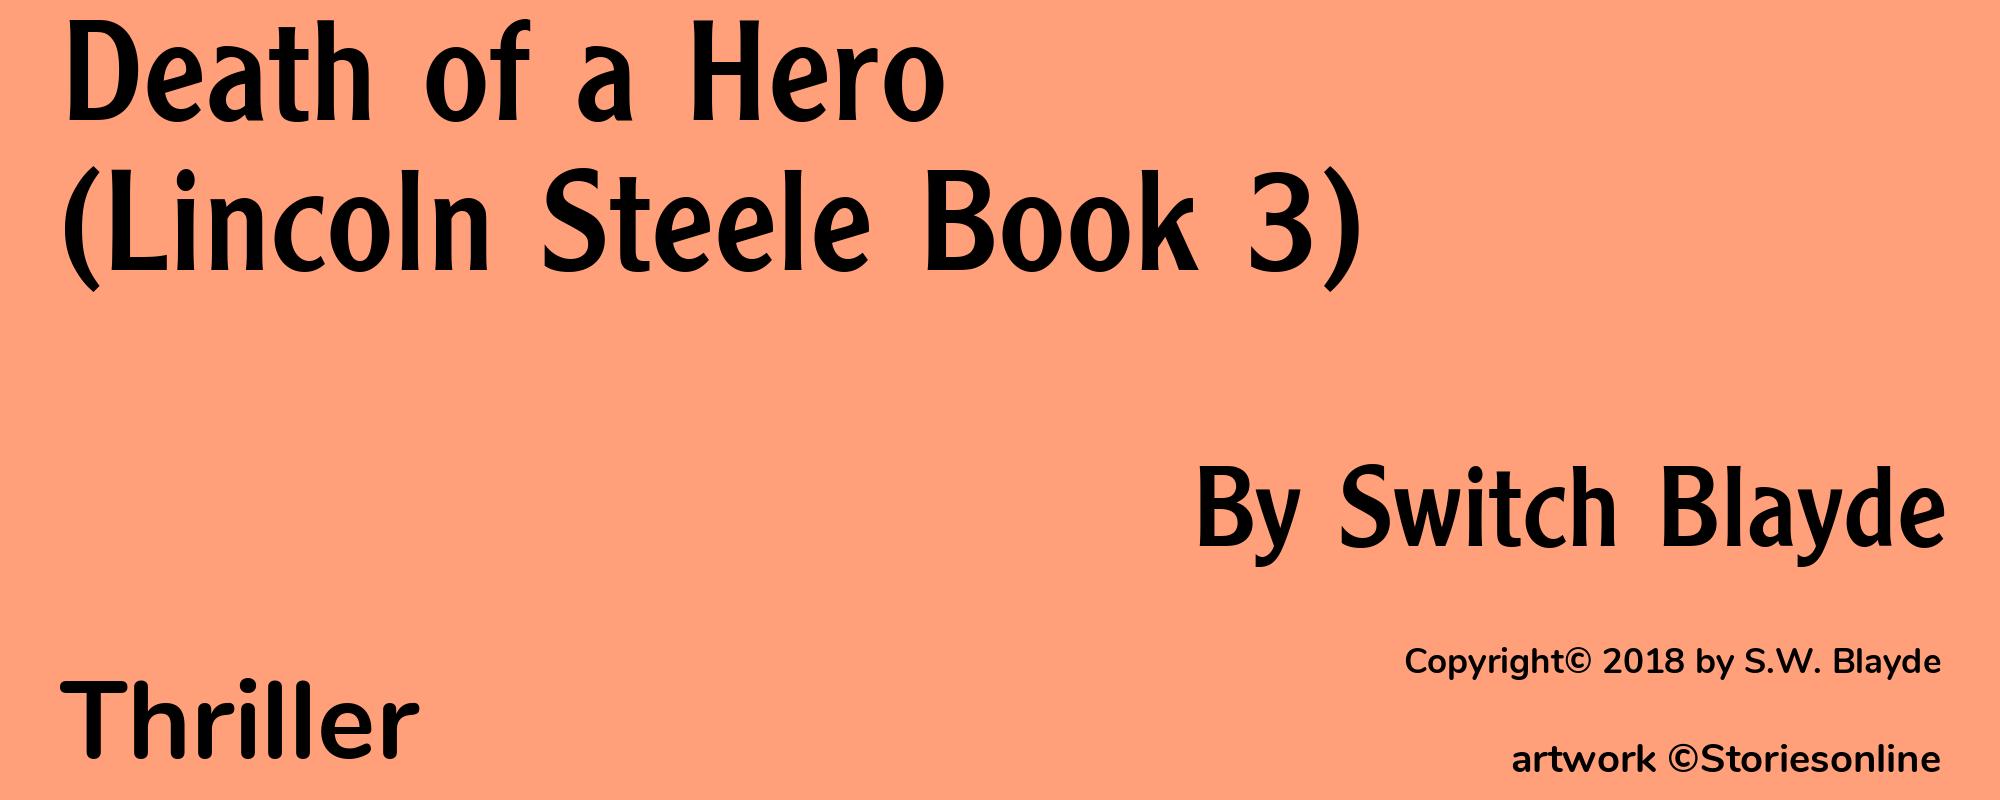 Death of a Hero (Lincoln Steele Book 3) - Cover